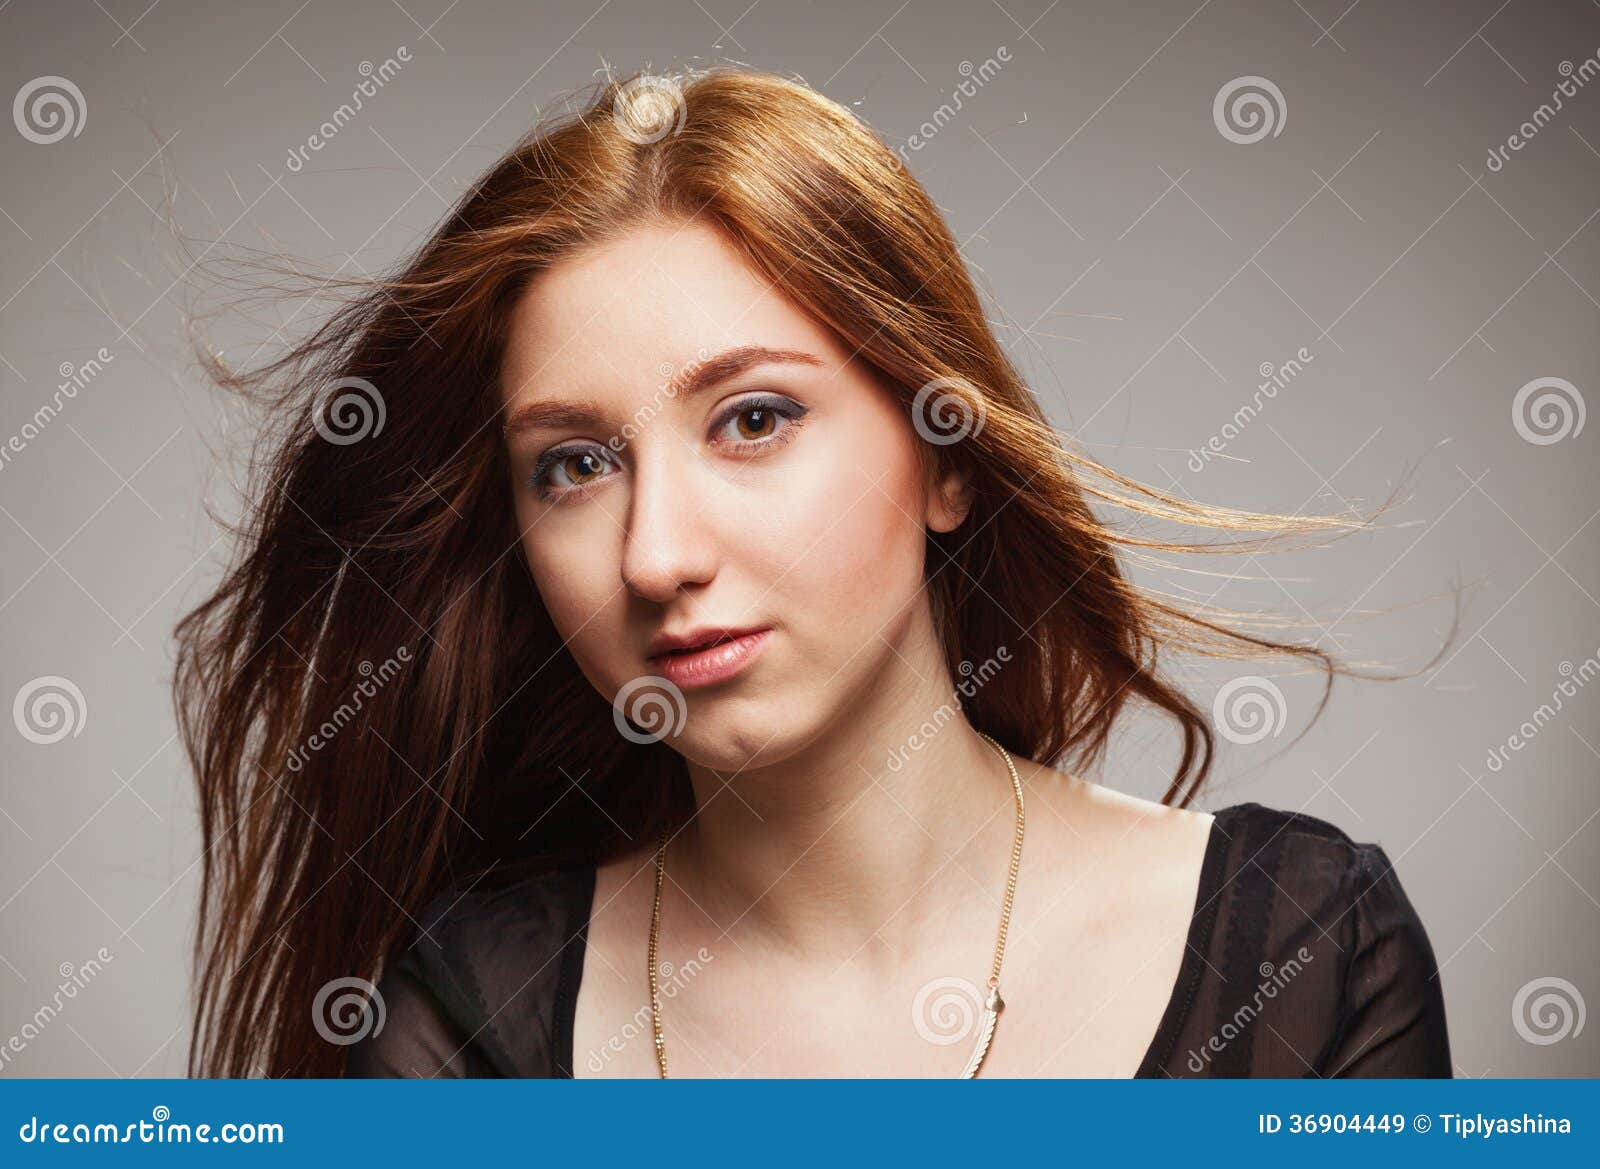 Portrait of Beautiful Girl with Fluttering Hairon Stock Image - Image ...